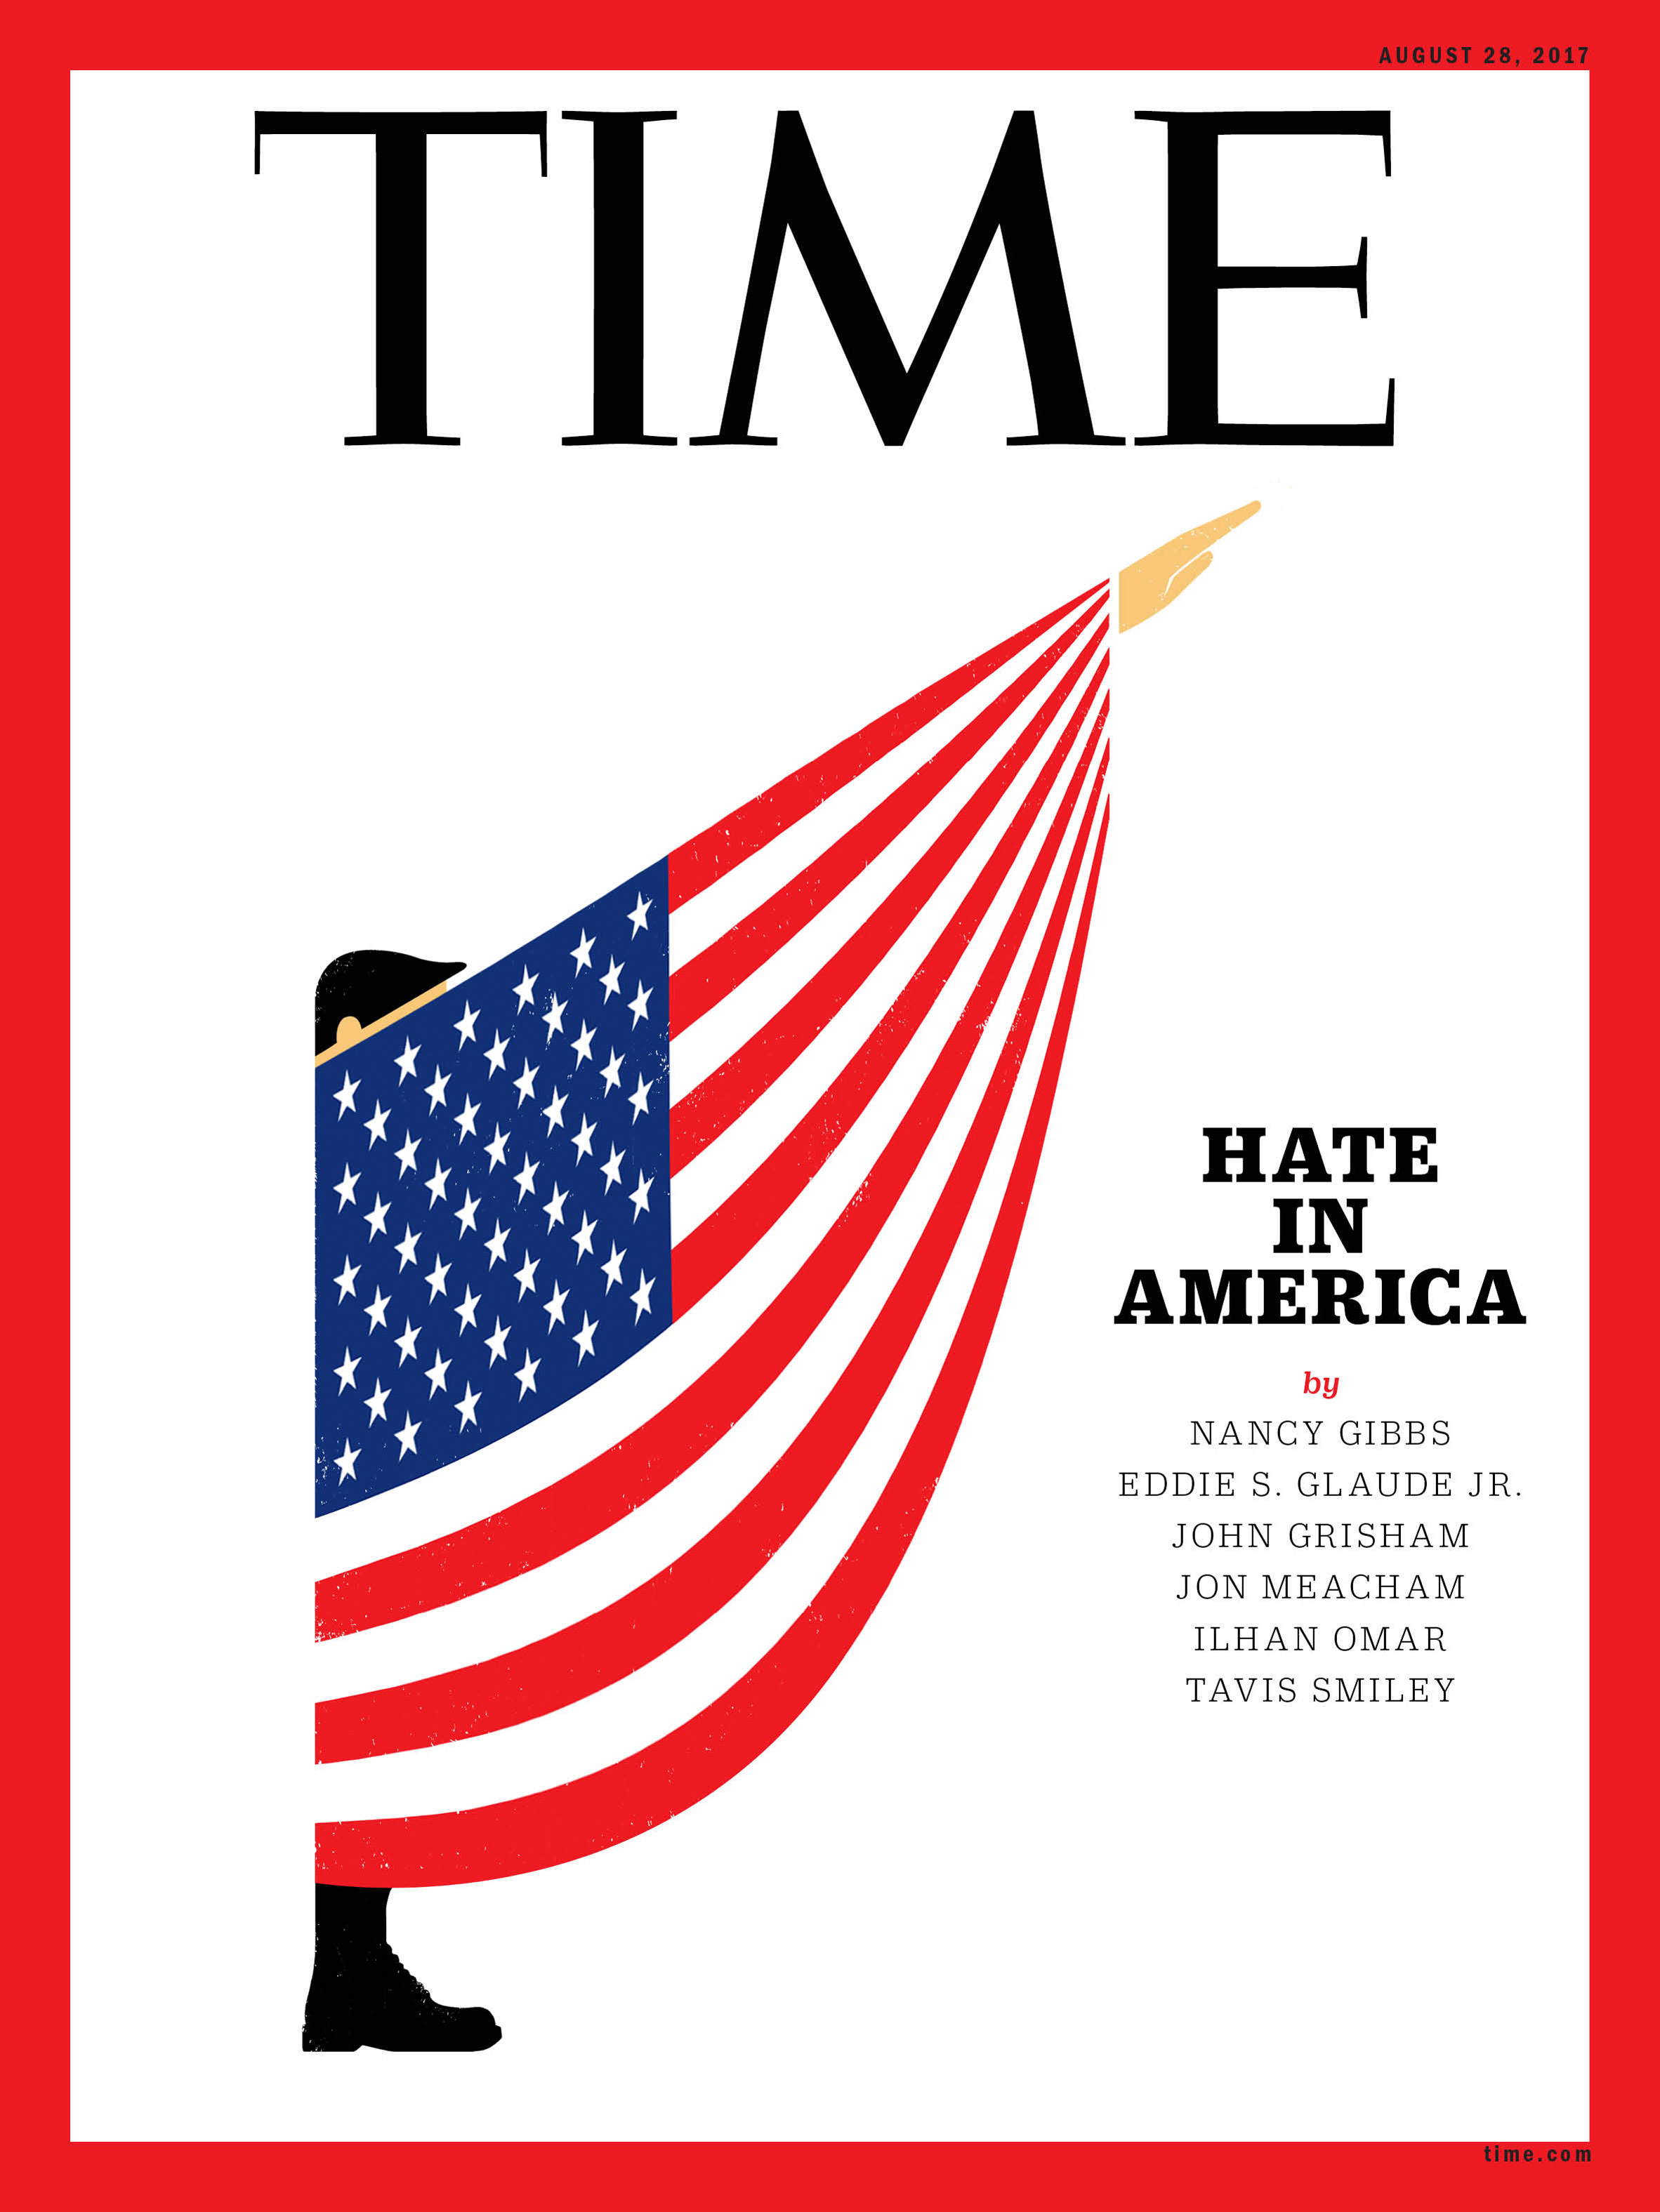 Major magazine covers address race hate in America